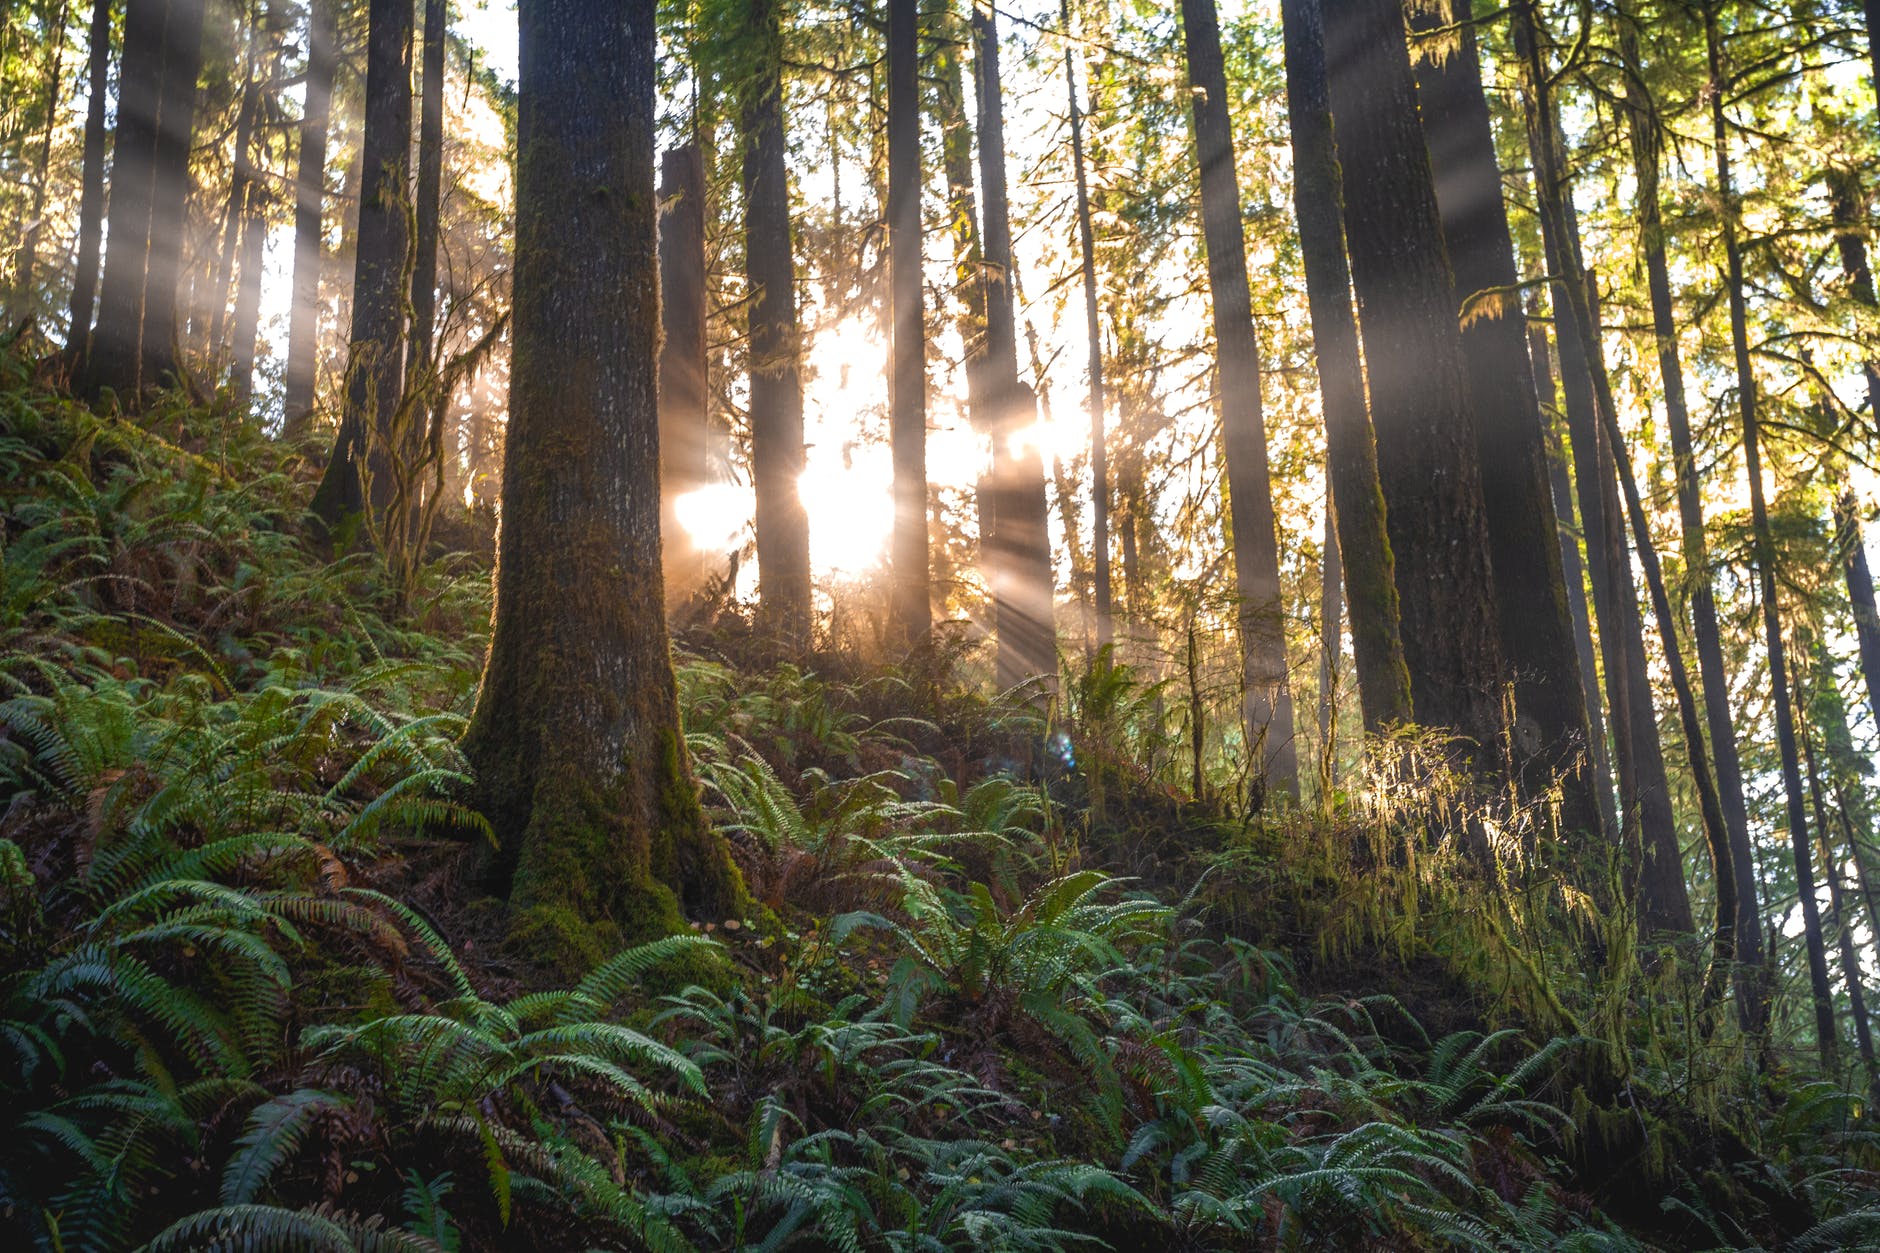 scenic photo of forest with sunlight